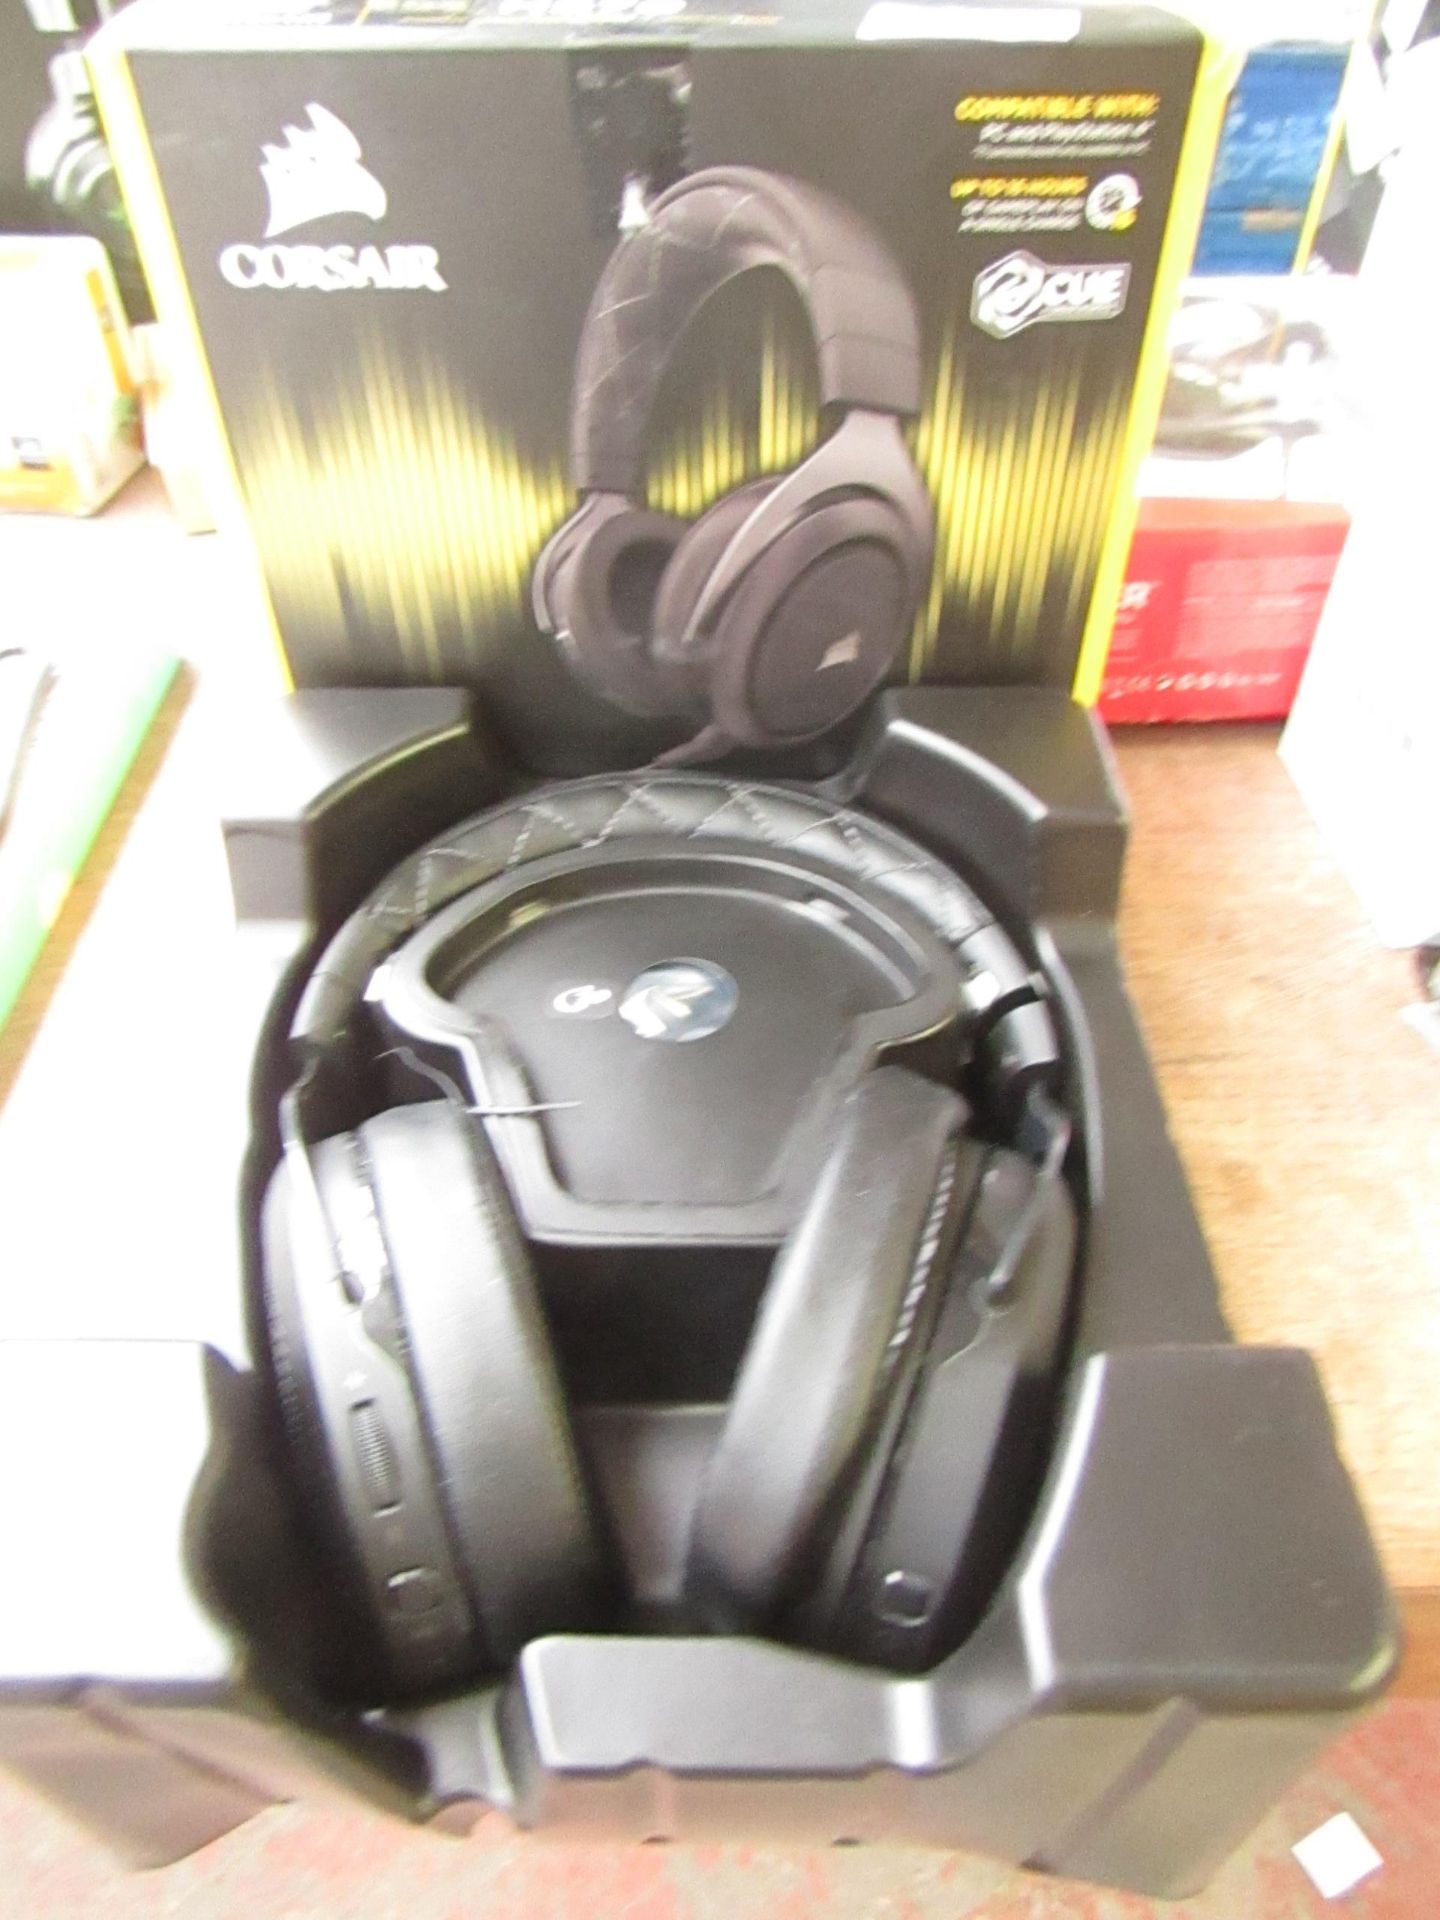 Corsair - HS70 Wireless Surround Sound 7.1 Gaming Headset - Tested Working for Sound & Boxed.